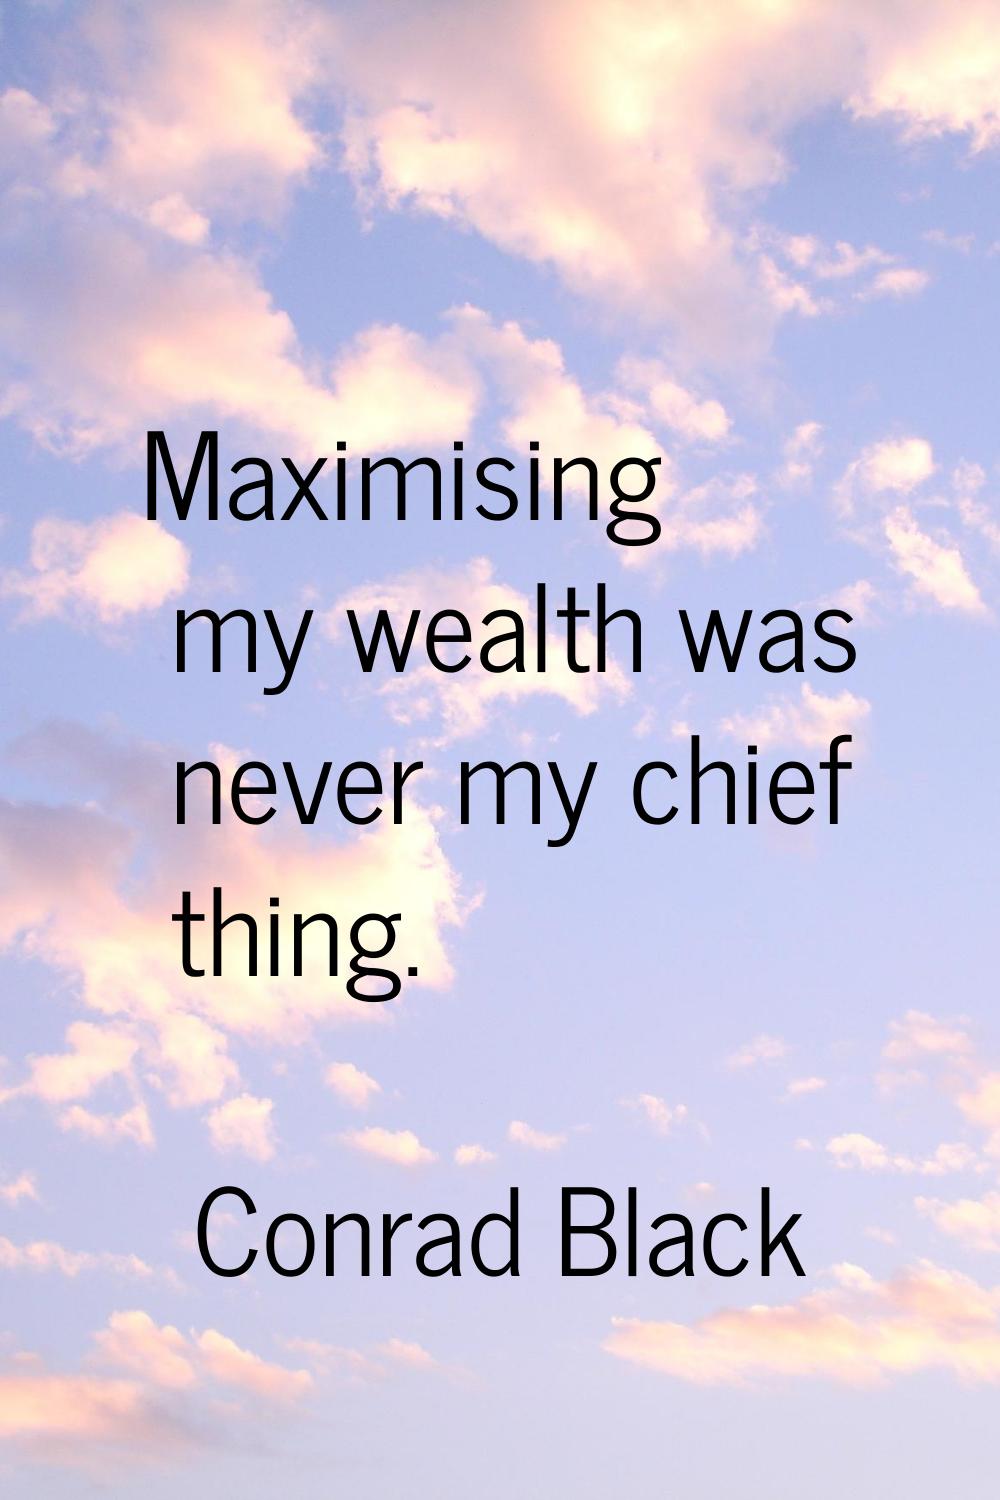 Maximising my wealth was never my chief thing.